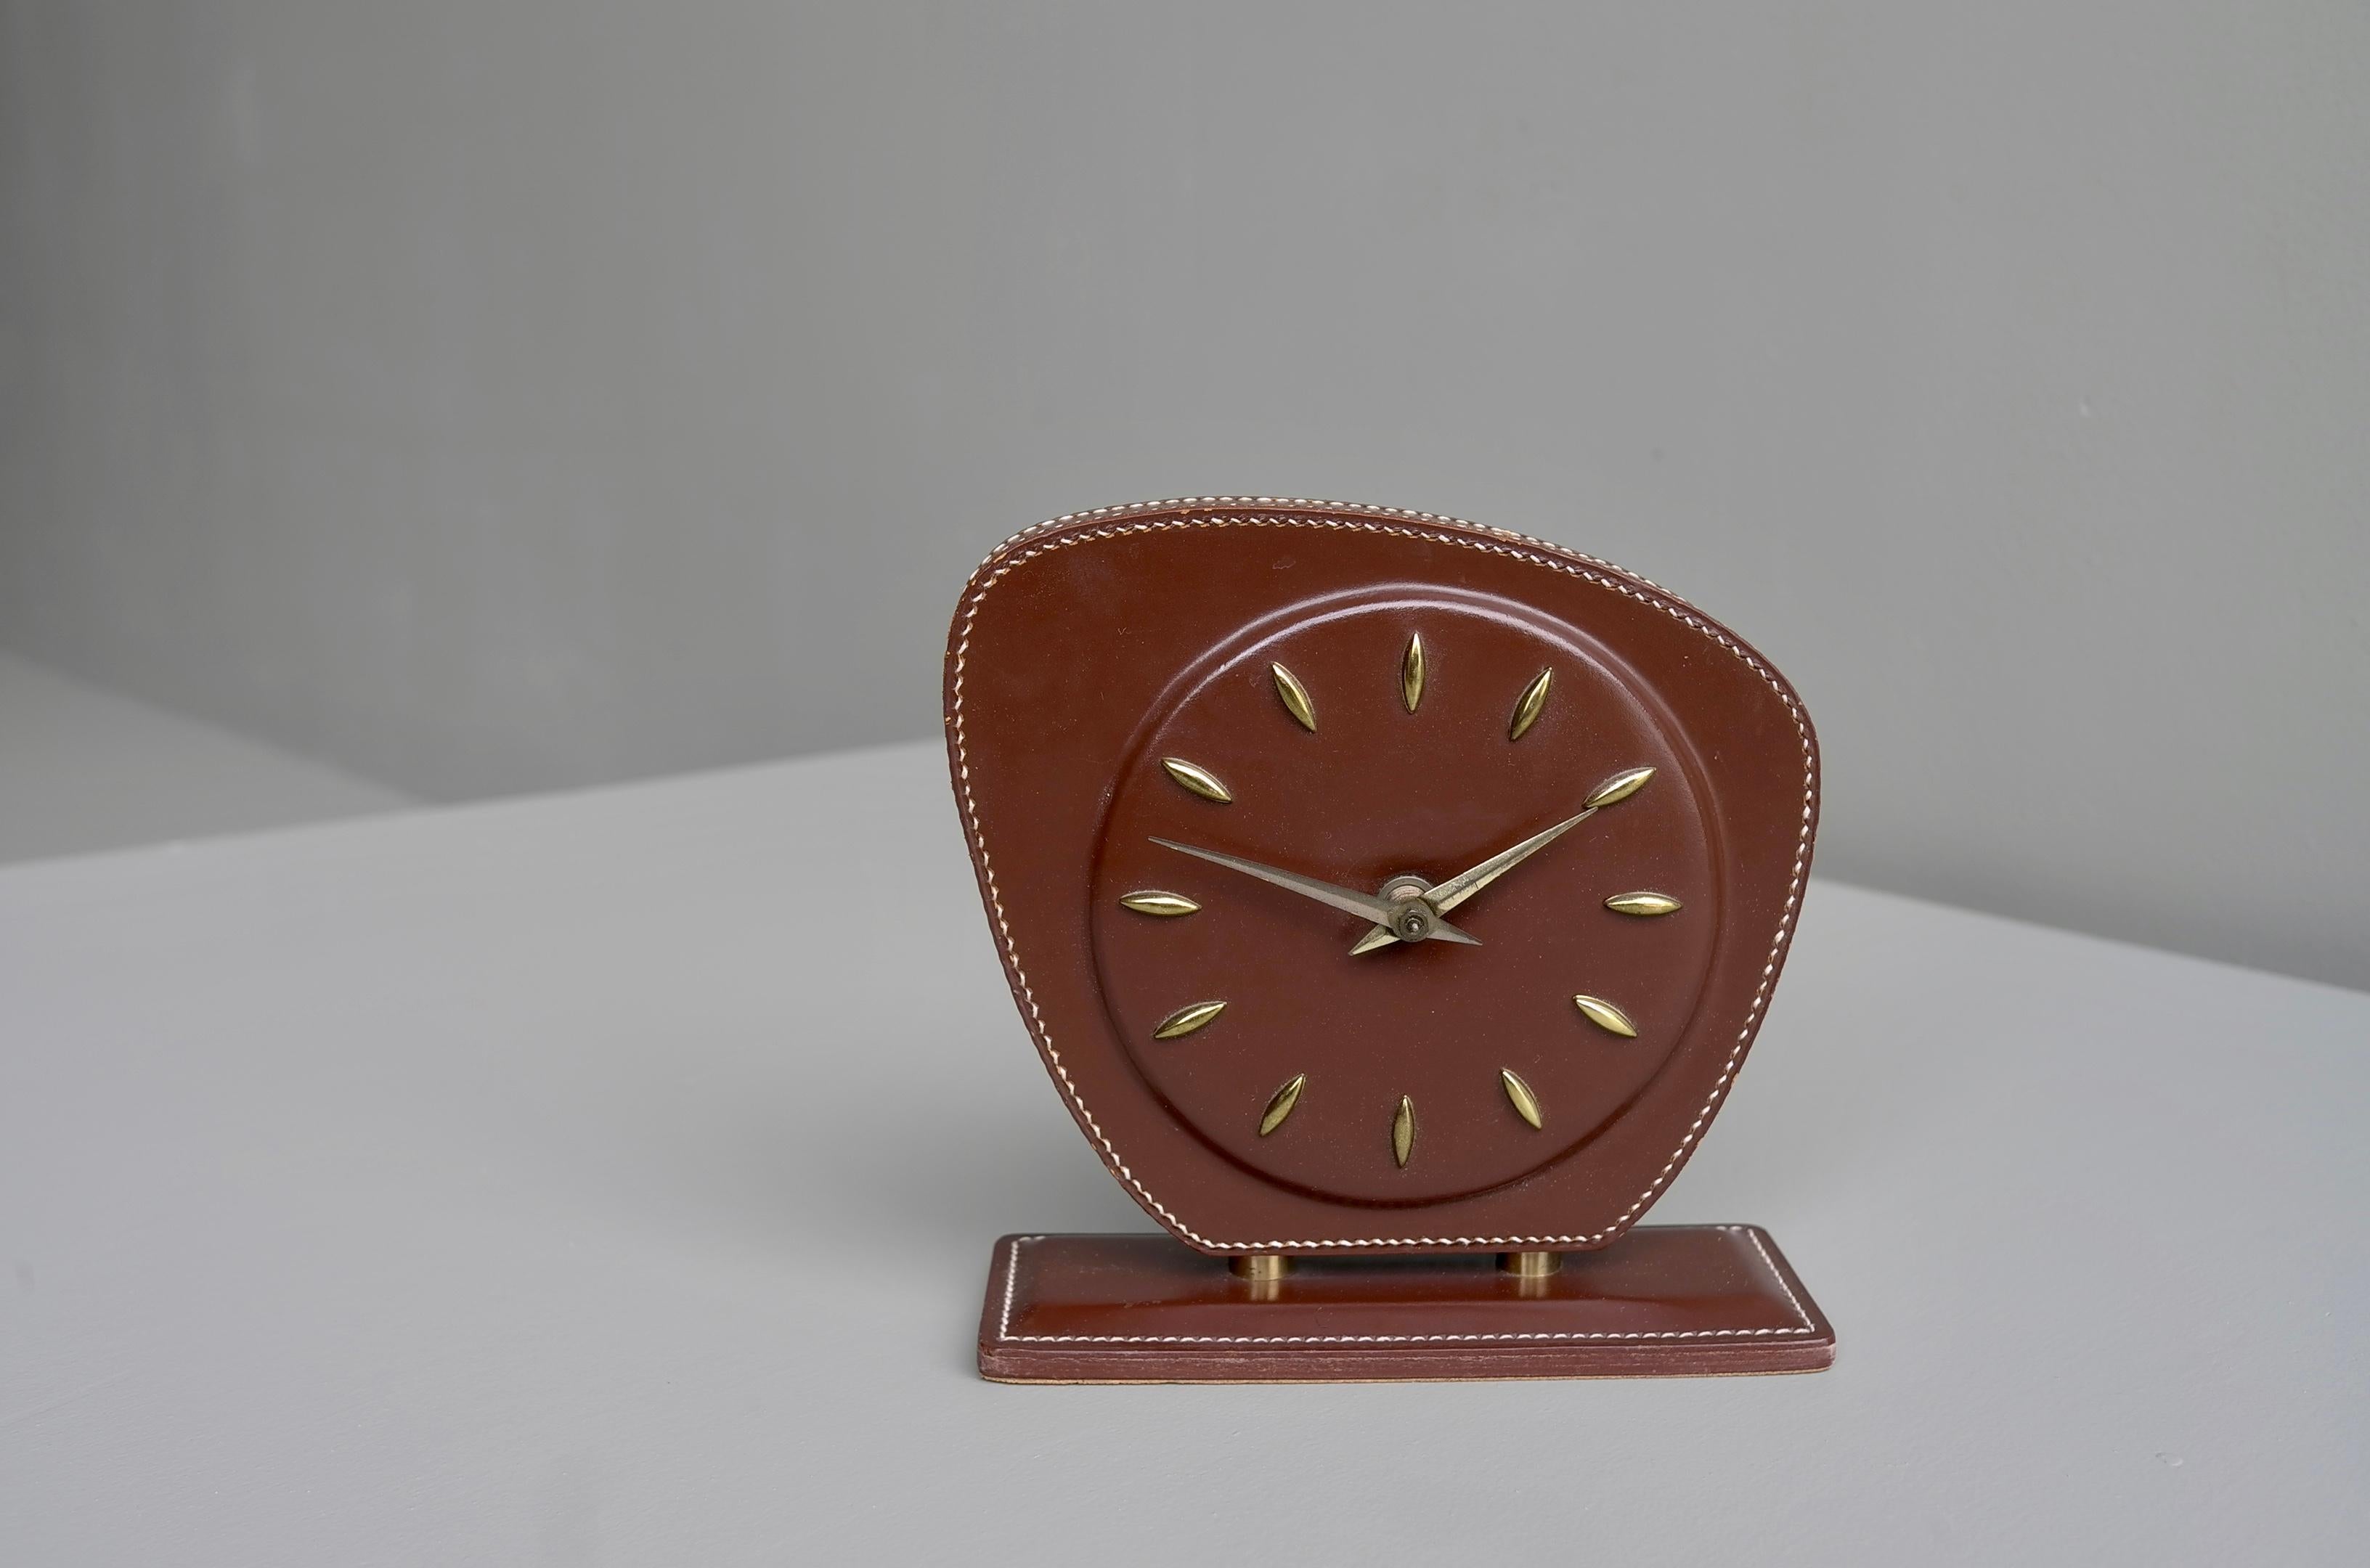 French Handstitched Brown Leather Clock, Jacques Adnet Attributed, 1950s For Sale 2